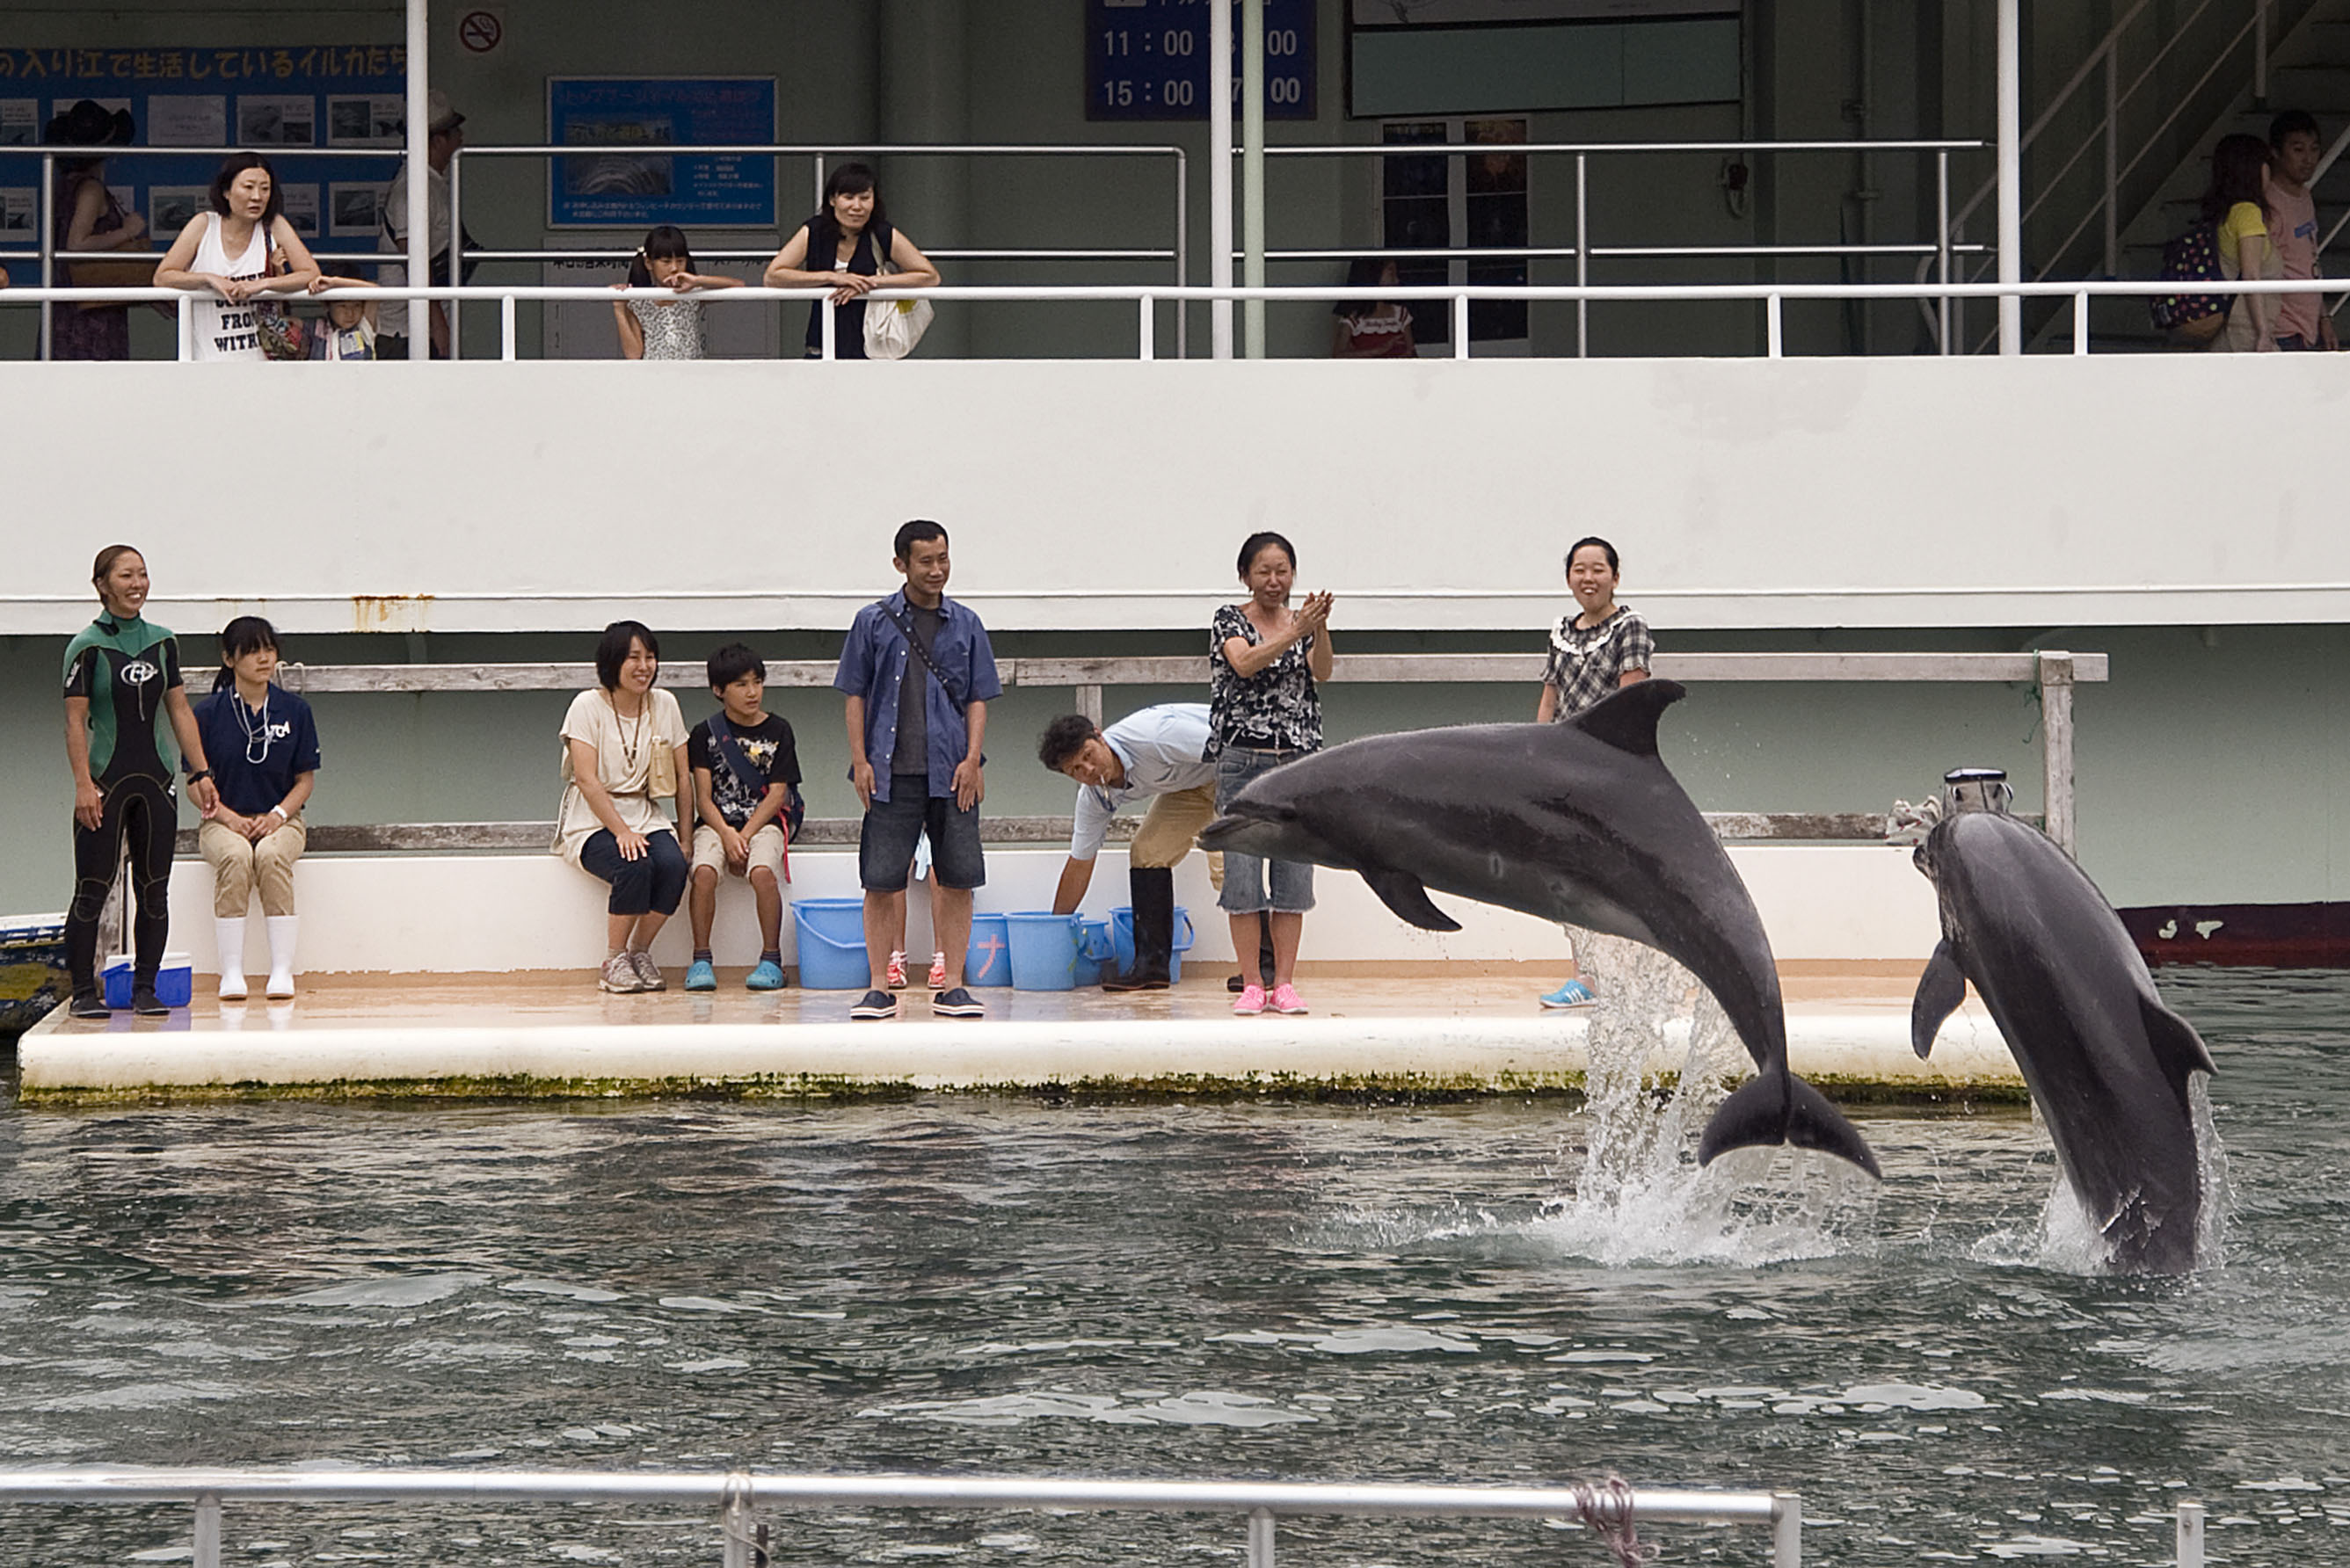 Surging numbers:  Visitors learn about dolphins at Shimoda Aquarium in Shizuoka Prefecture on Sunday. The aquarium is one of just a handful in Japan that does not take dolphins from the wild but instead breeds them on-site. | ROB GILHOOLY